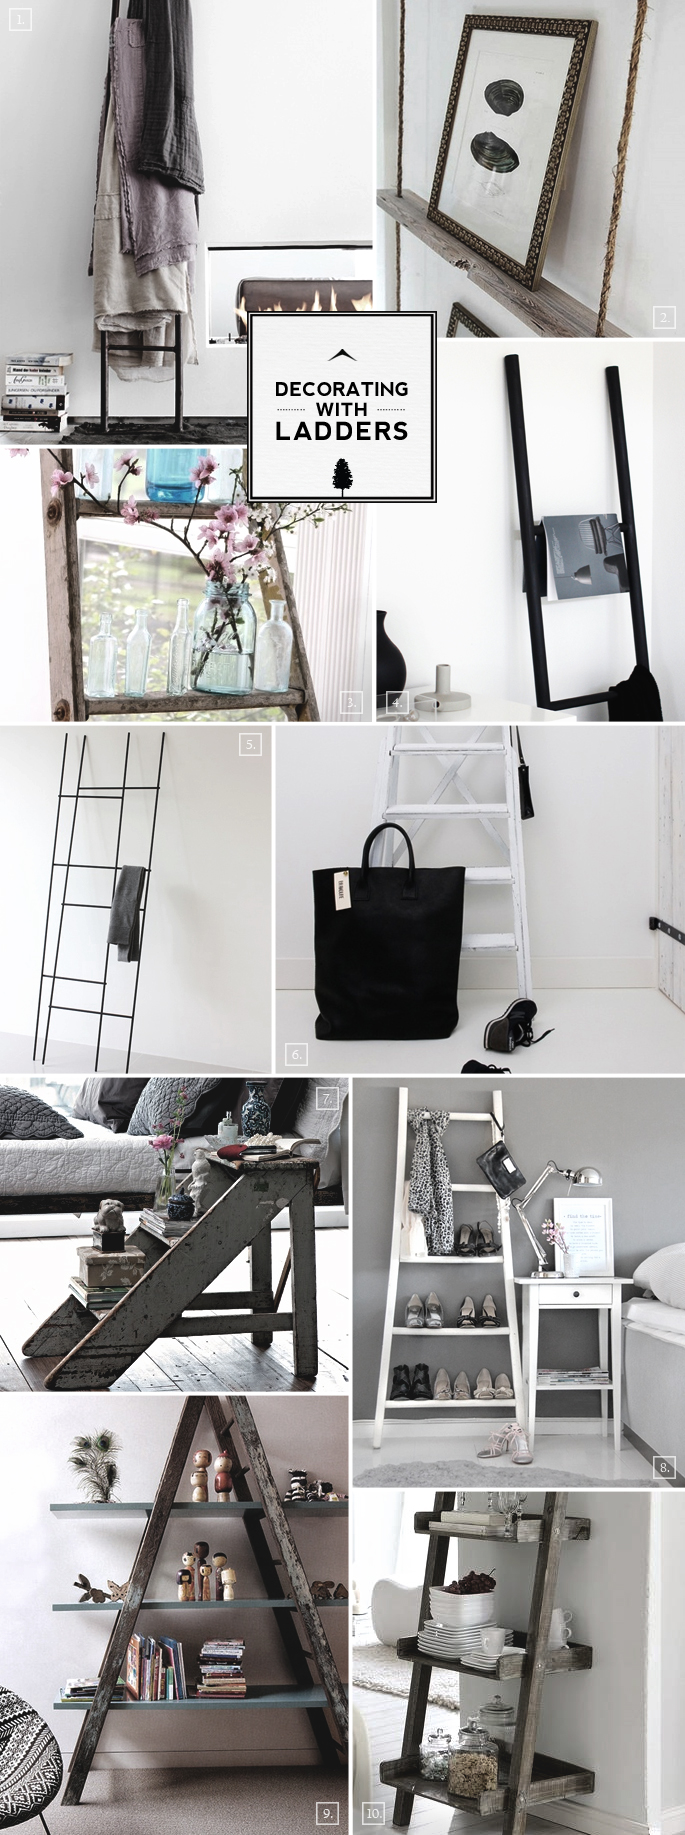 Decorating With Ladders